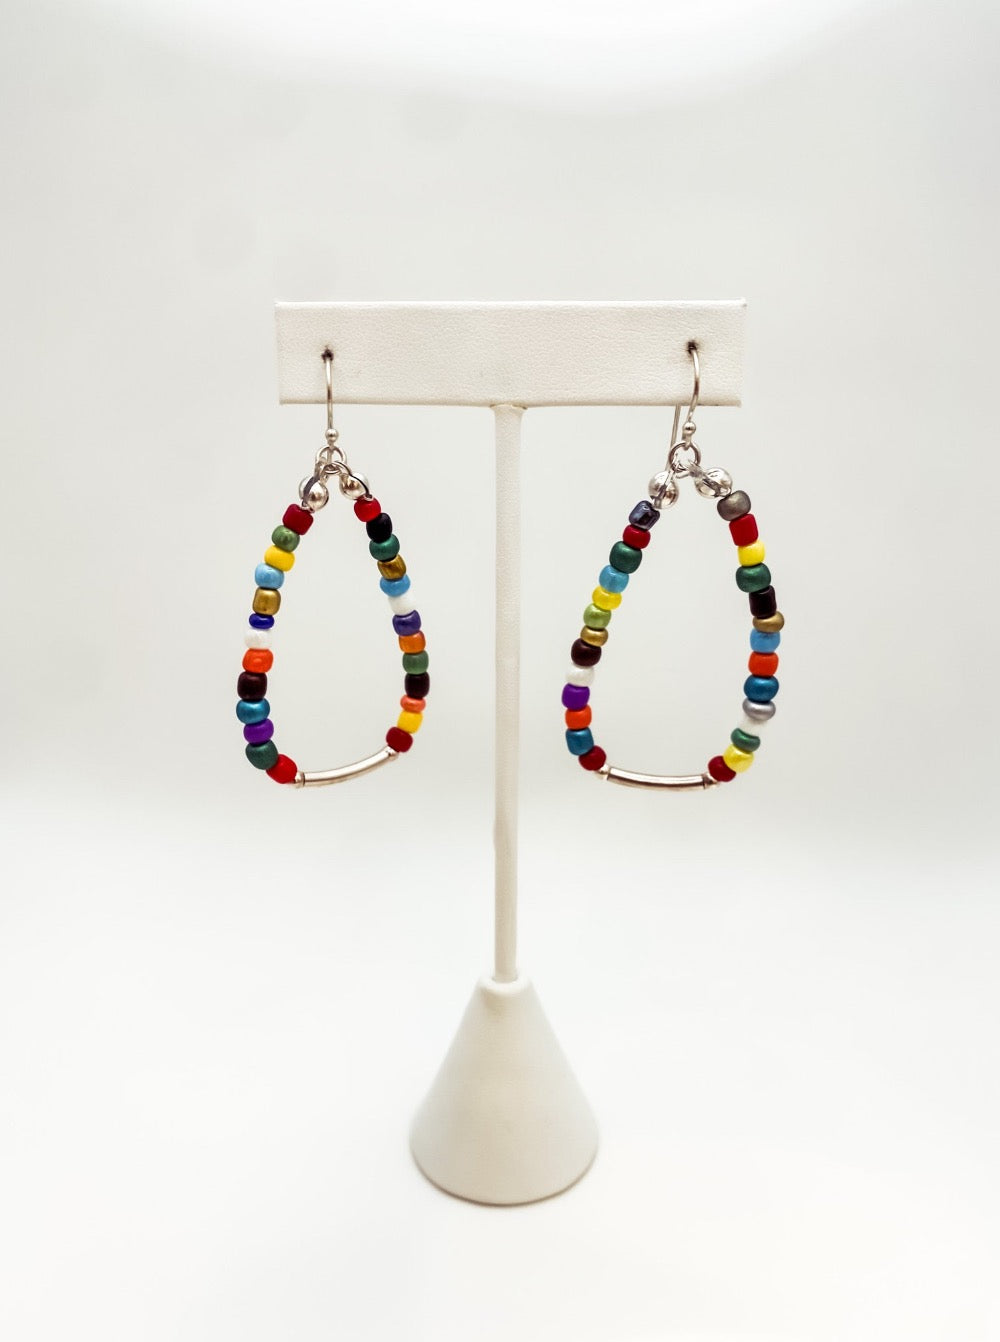 Multi-Colored Wood Beads on Silver